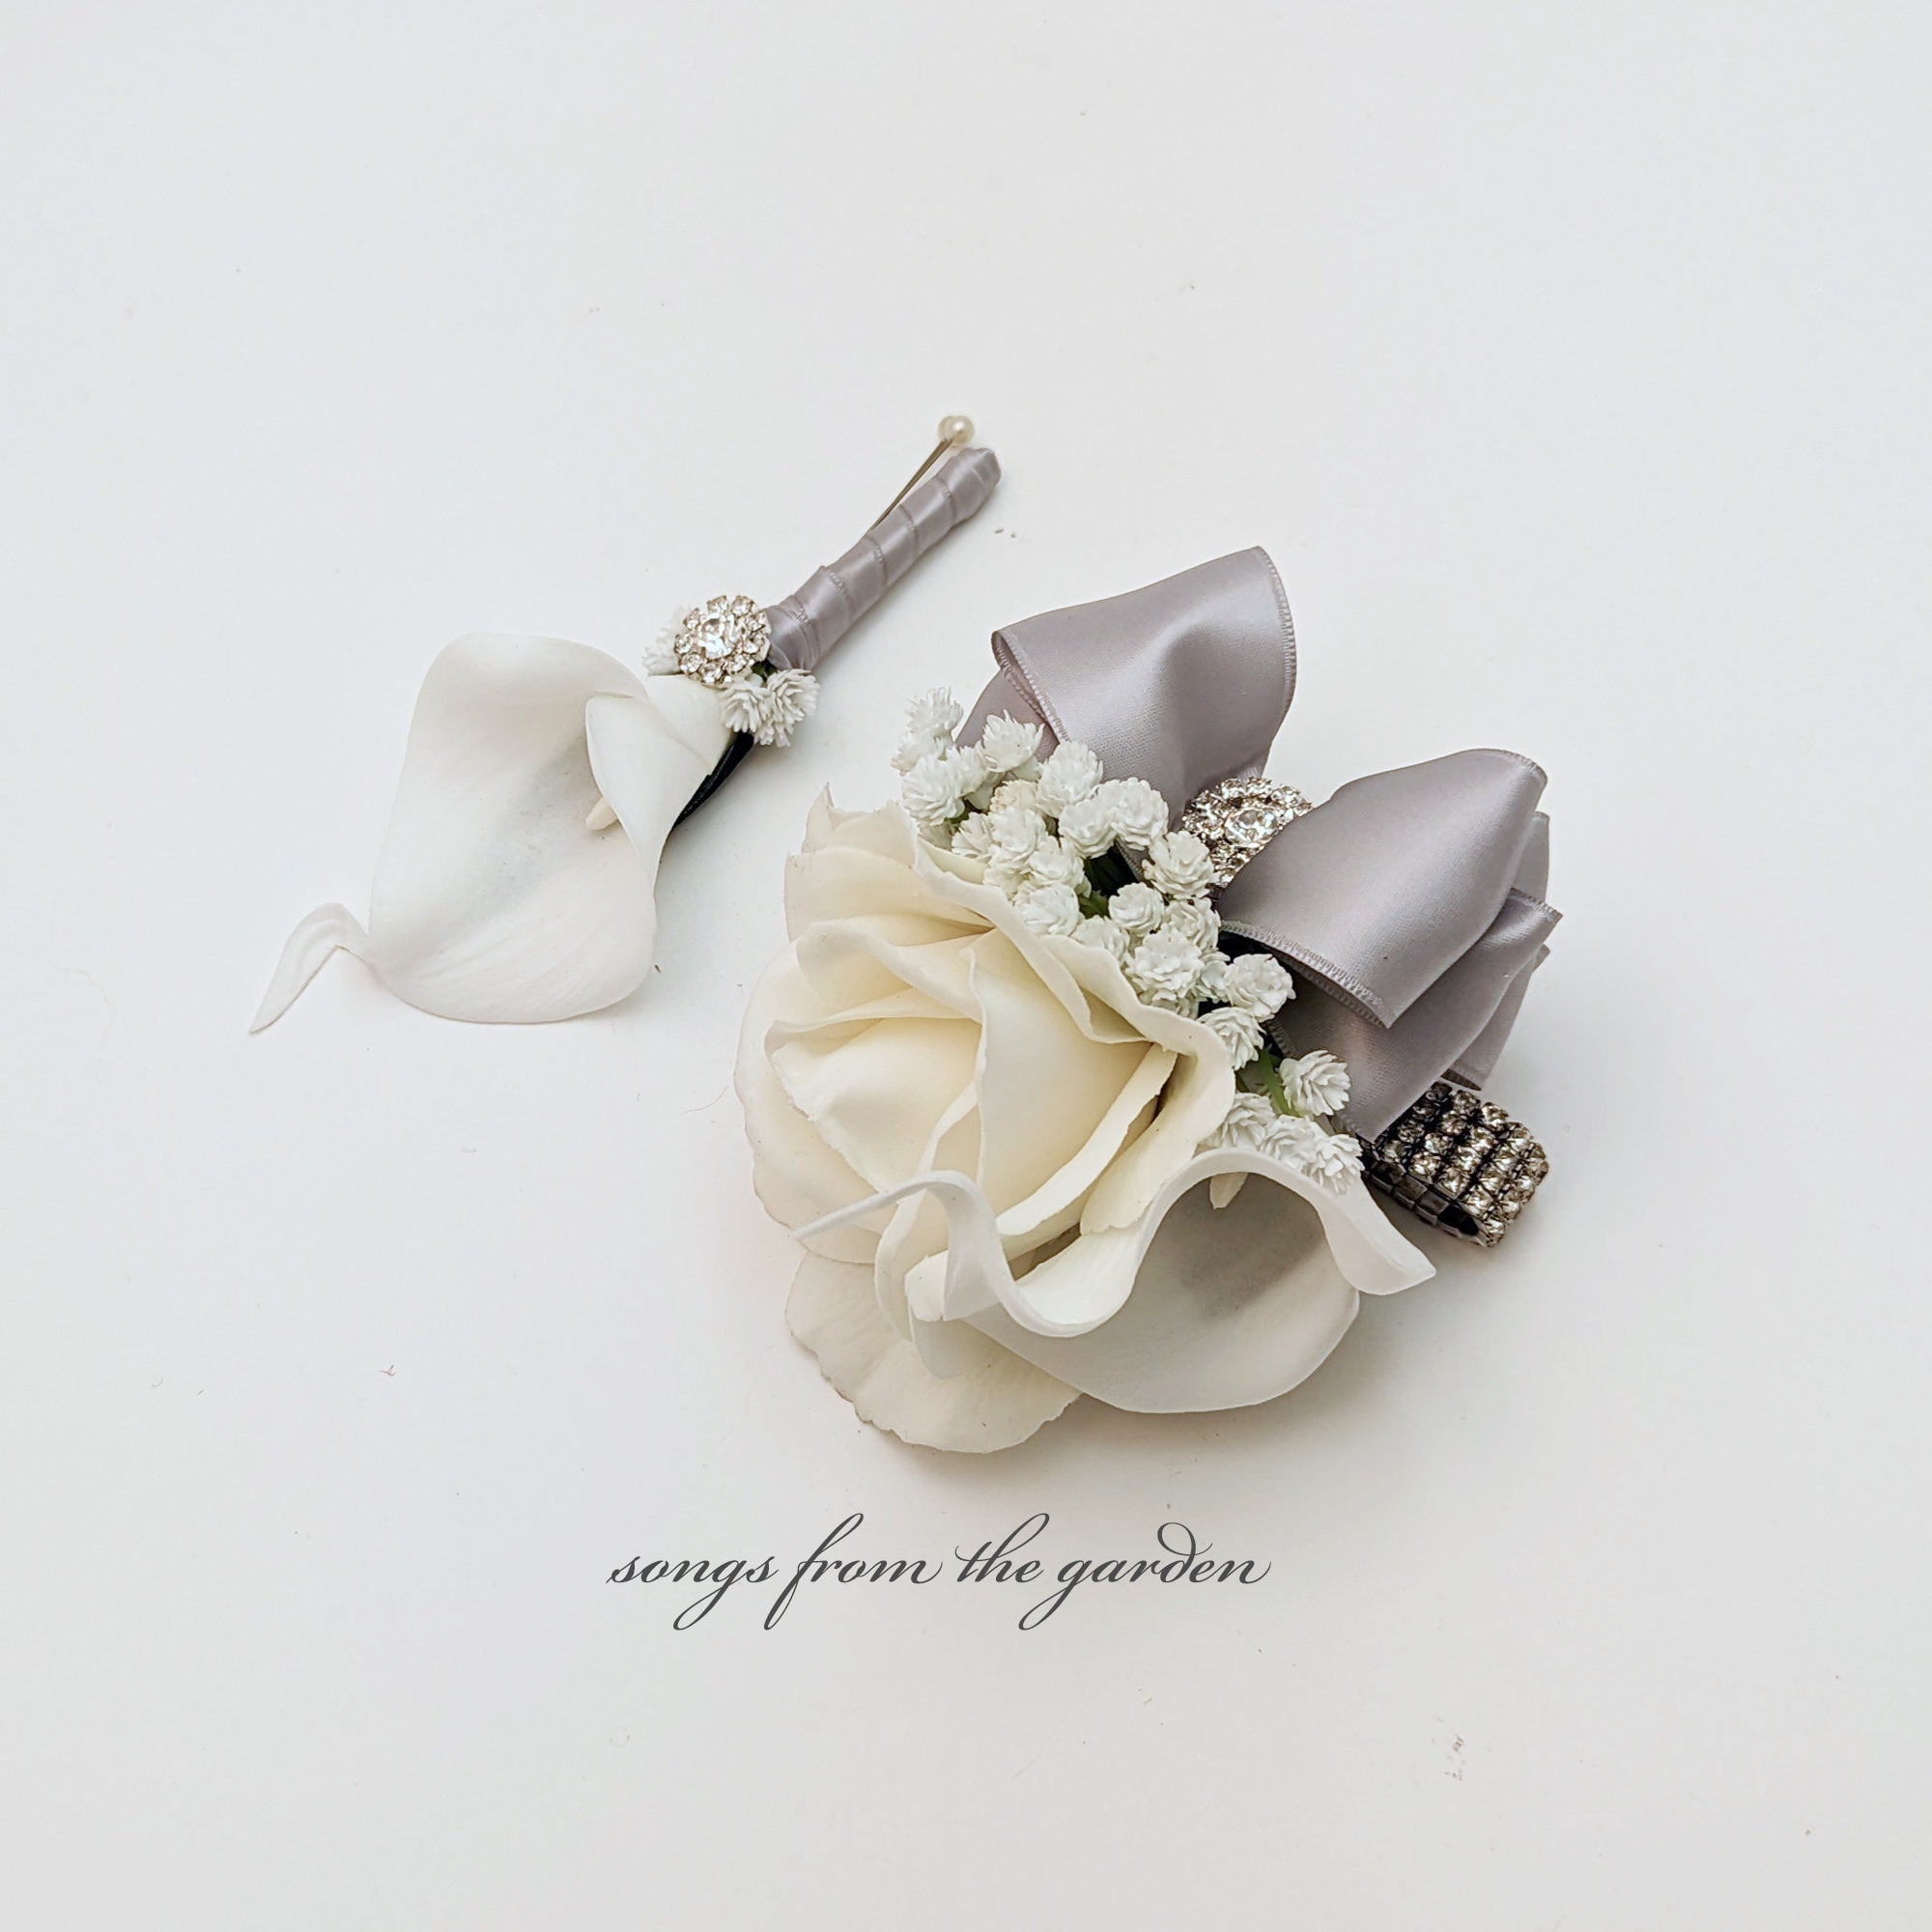 Calla & Rose Corsage with Rhinestones - Real Touch Rose Wedding Boutonniere Wedding Corsage Mother of the Bride - Homecoming Prom Corsage